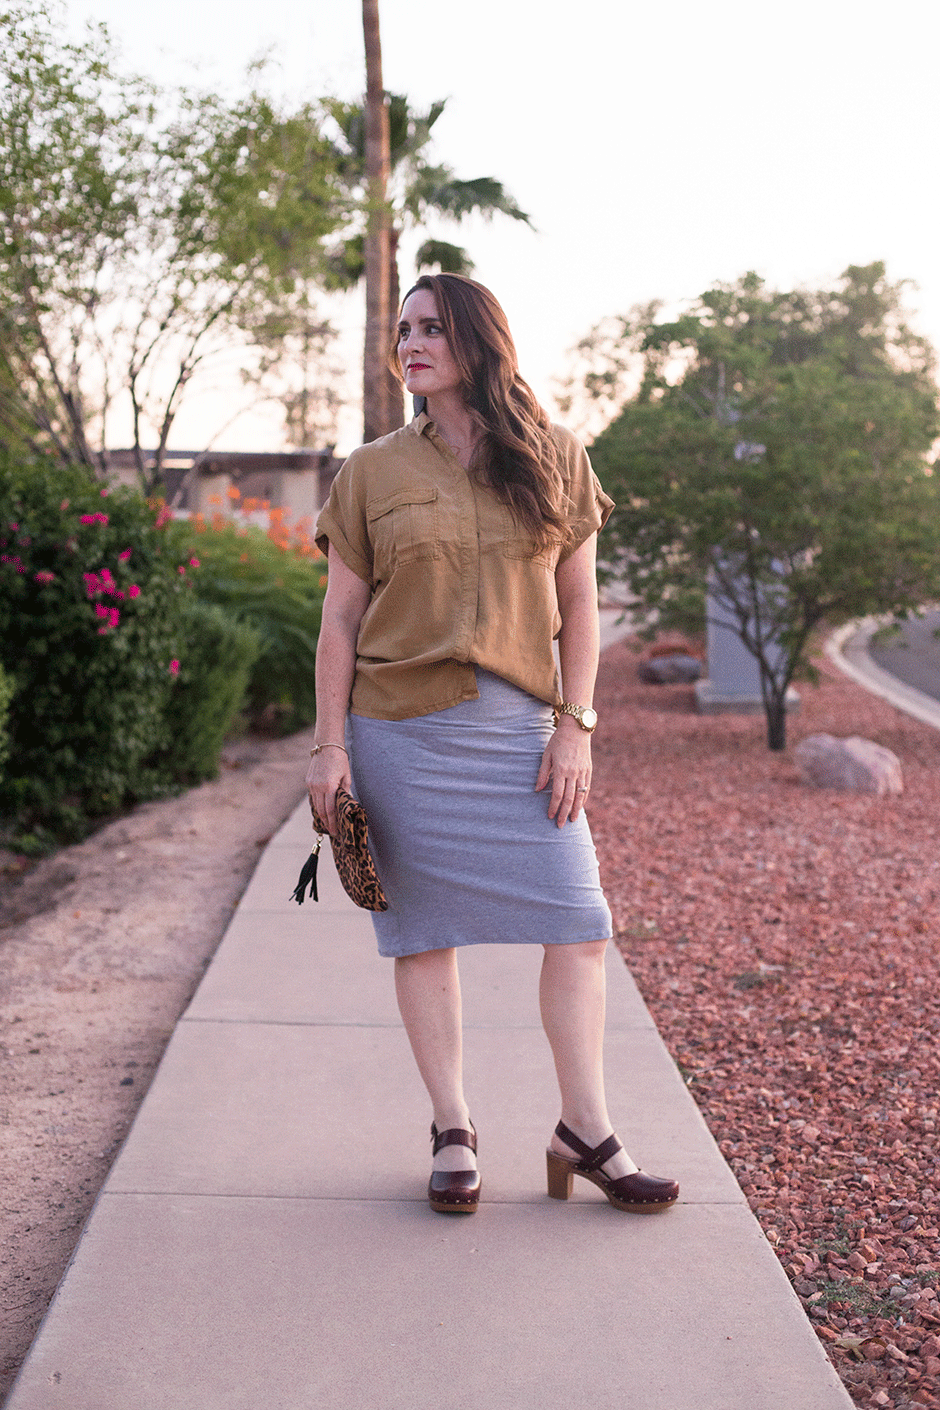 Knit pencil skirts are one of the comfiest, most easy-to-wear staples in my closet and the best part is that they're a breeze to sew! If you're looking for an easy sew skirt project, this is it, even if you don't have a lot of experience sewing with knits! Read on for details about how I created this knit pencil skirt.